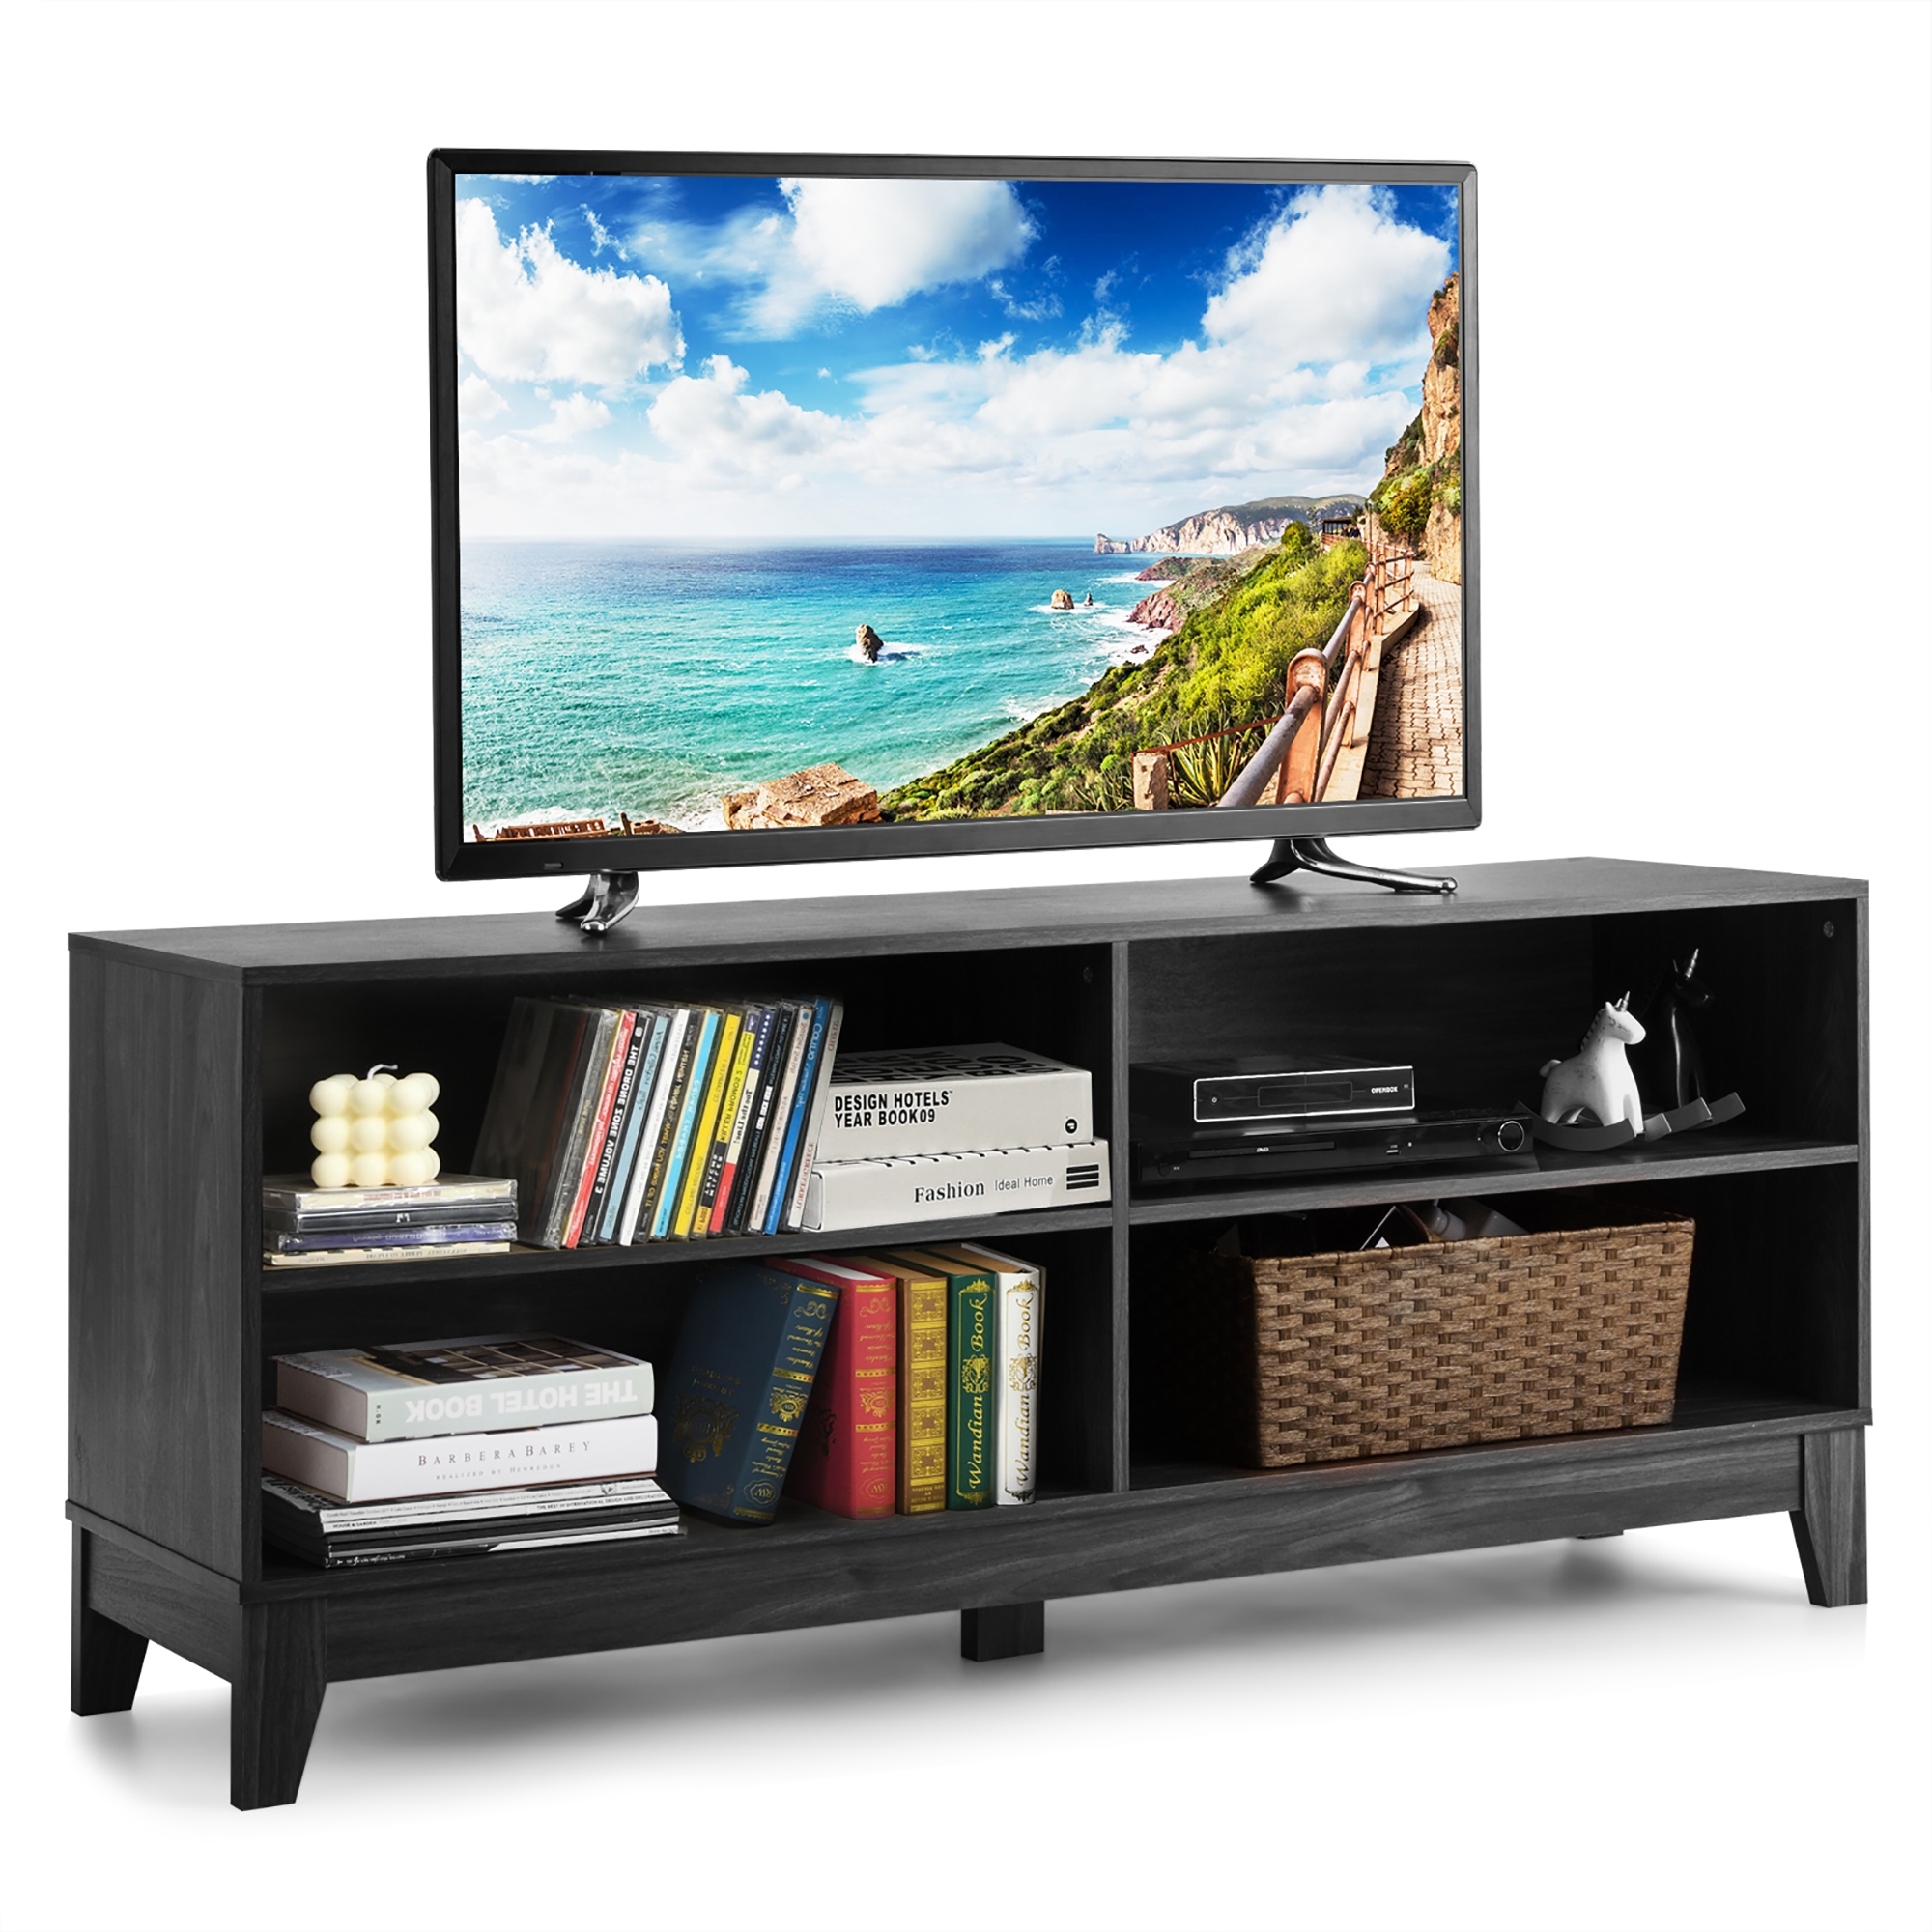 Costway 58'' Modern Wood TV Stand Console Storage Entertainment Media Center Black - image 1 of 10